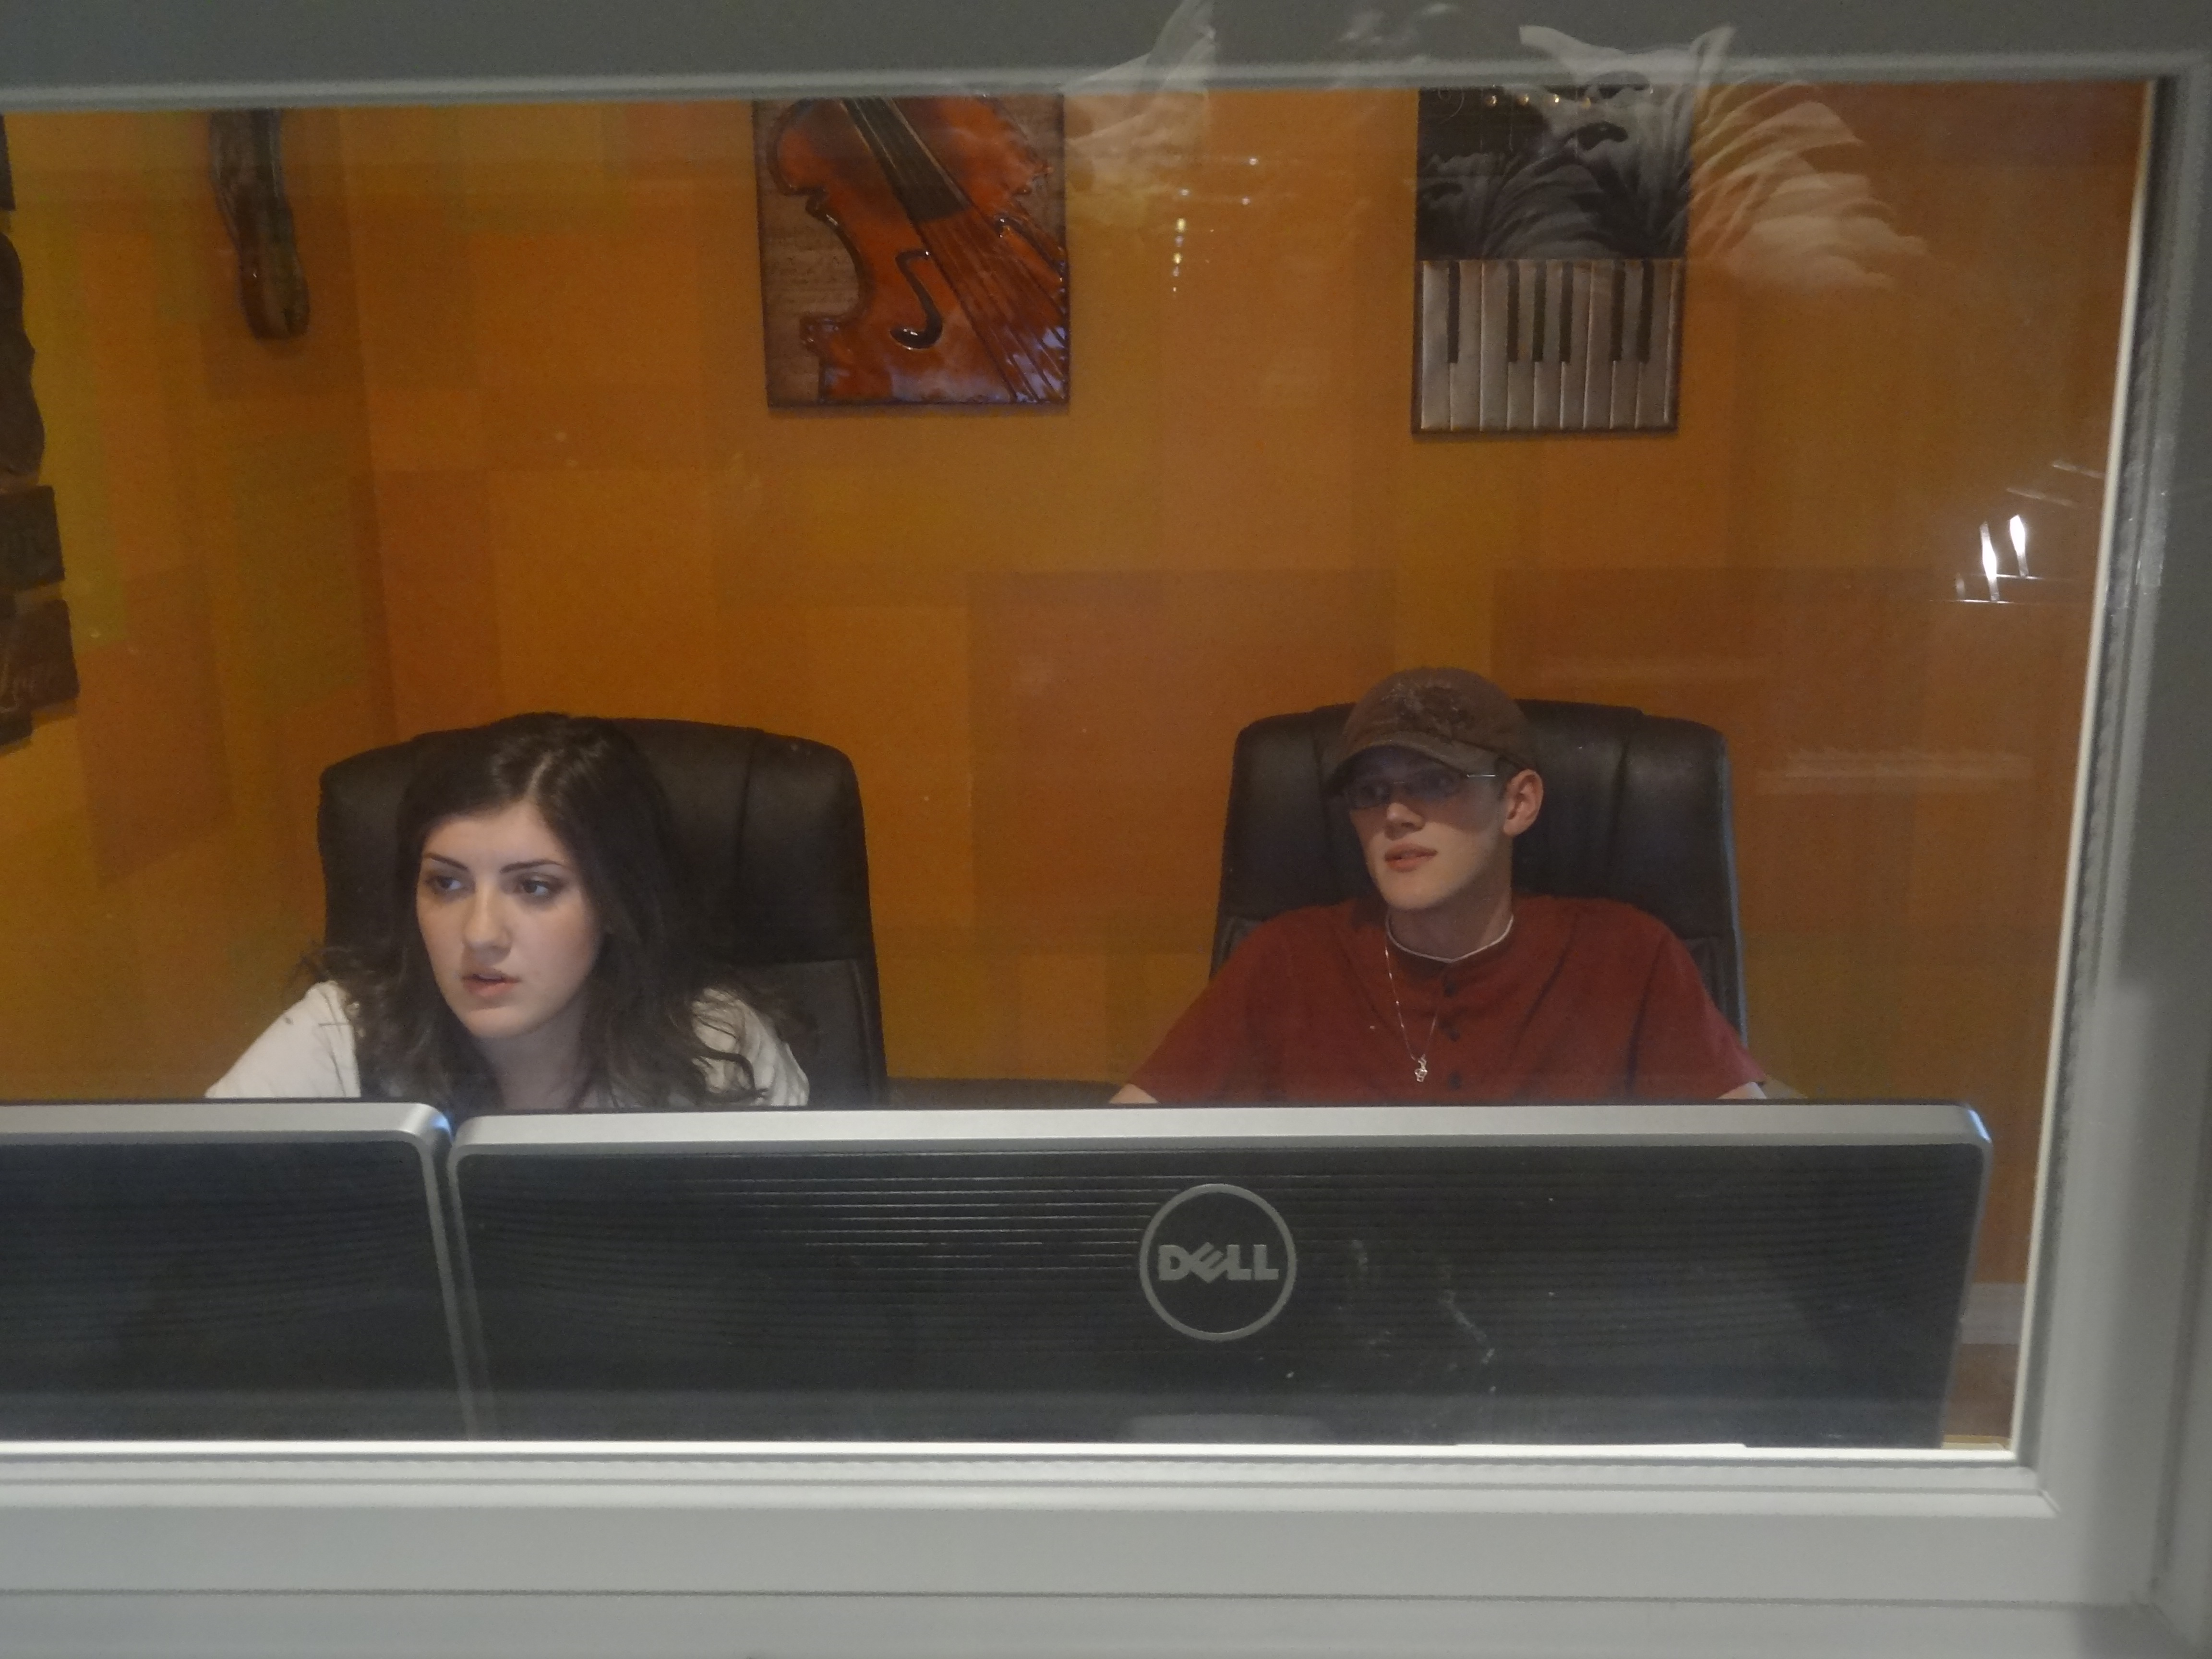 Shot from inside the sound booth shows the exhausted pair, Sound Engineer Mary Rose Maher, and Composer, Nate Weil working hard into the night to meet the deadline.